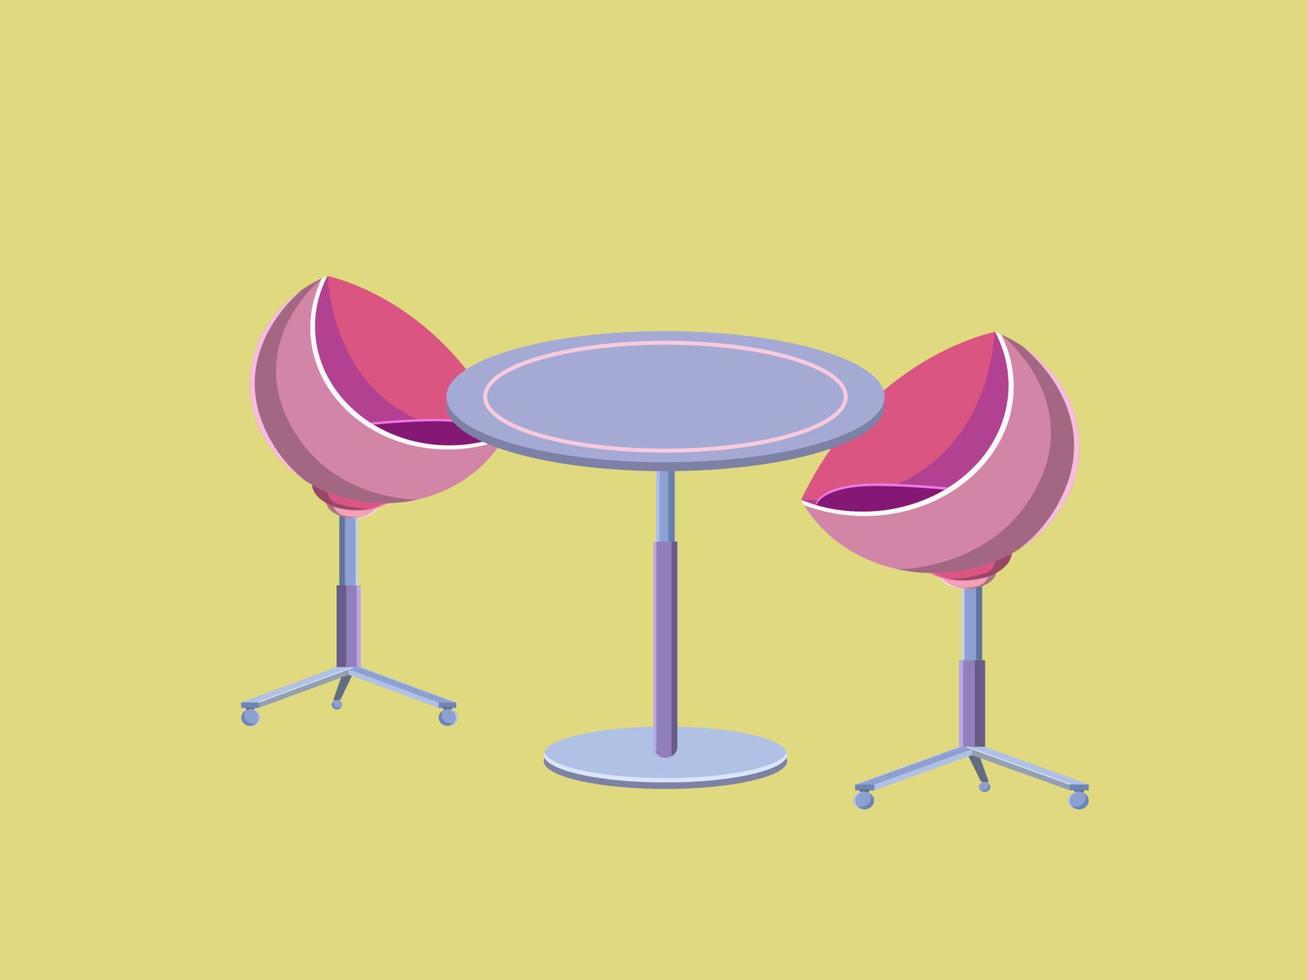 couple of pink round chair with blue round table flat illustration on yellow background vector